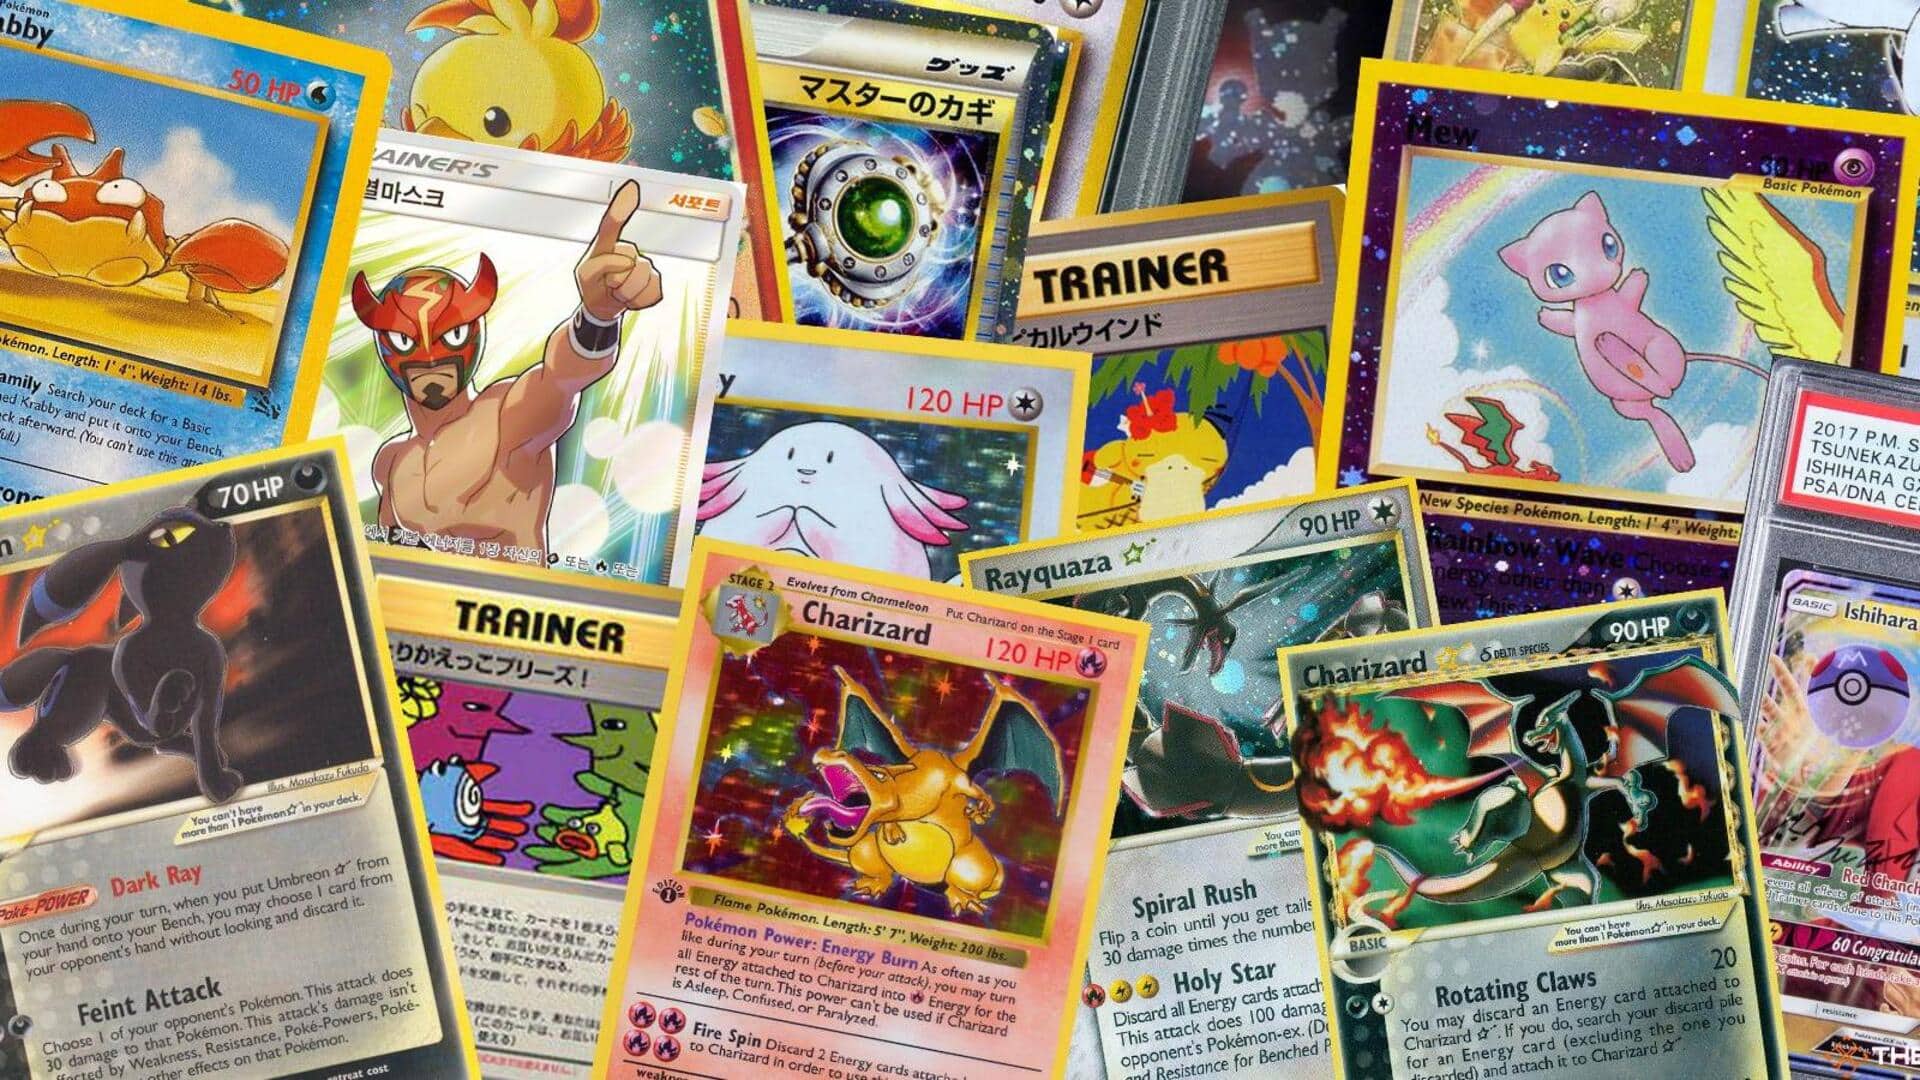 Thieves steal 35,000 Pokemon cards worth thousands of dollars 